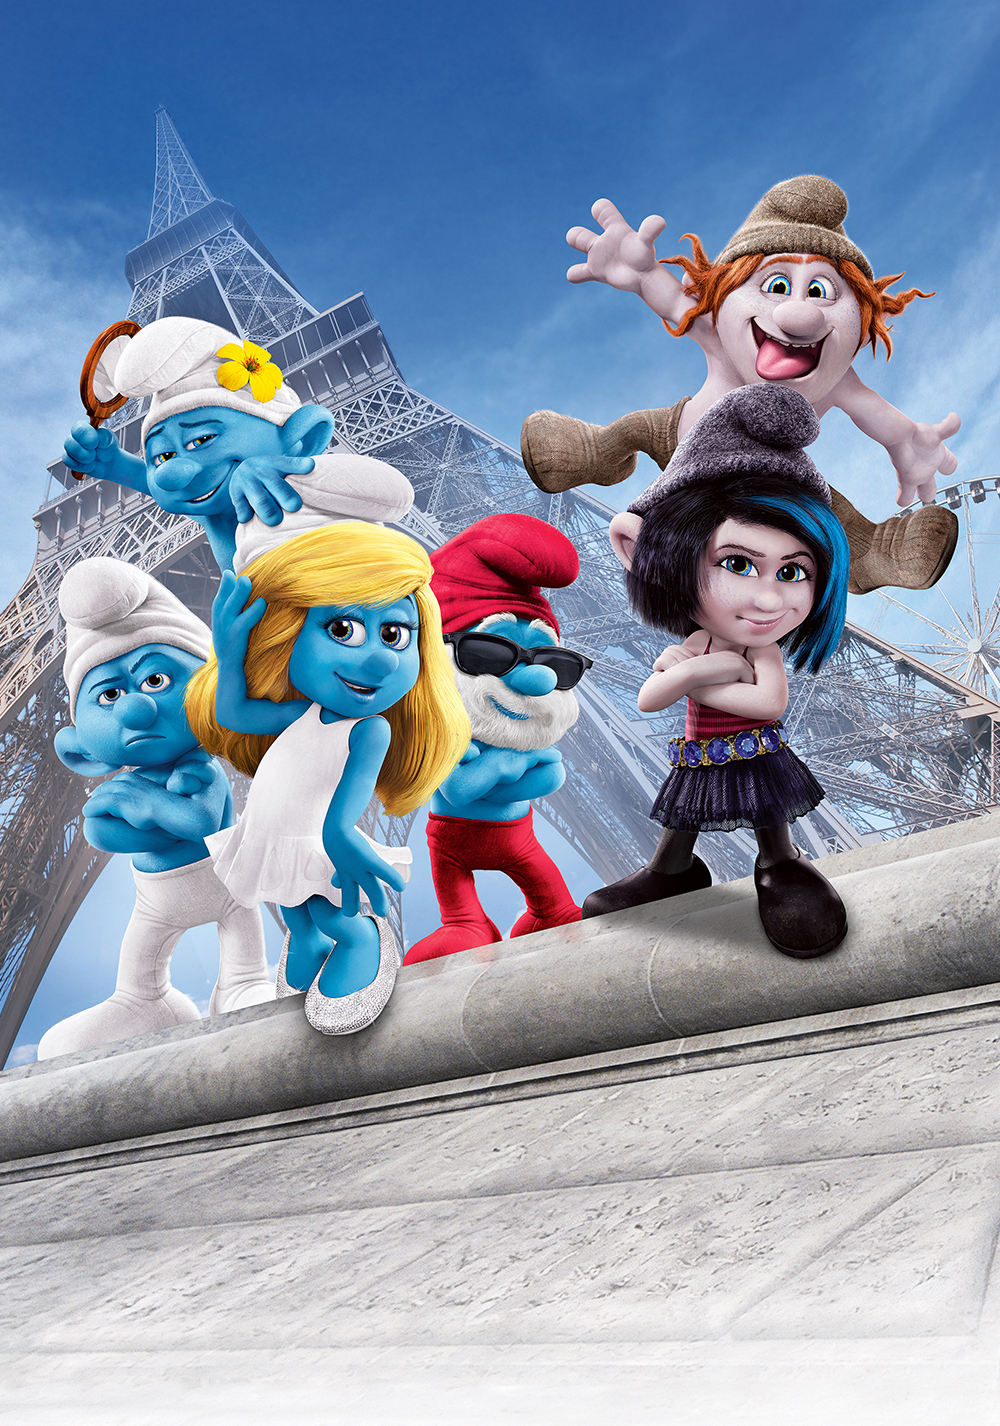 The Smurfs 2 Movie Poster - ID: 139451 - Image Abyss.